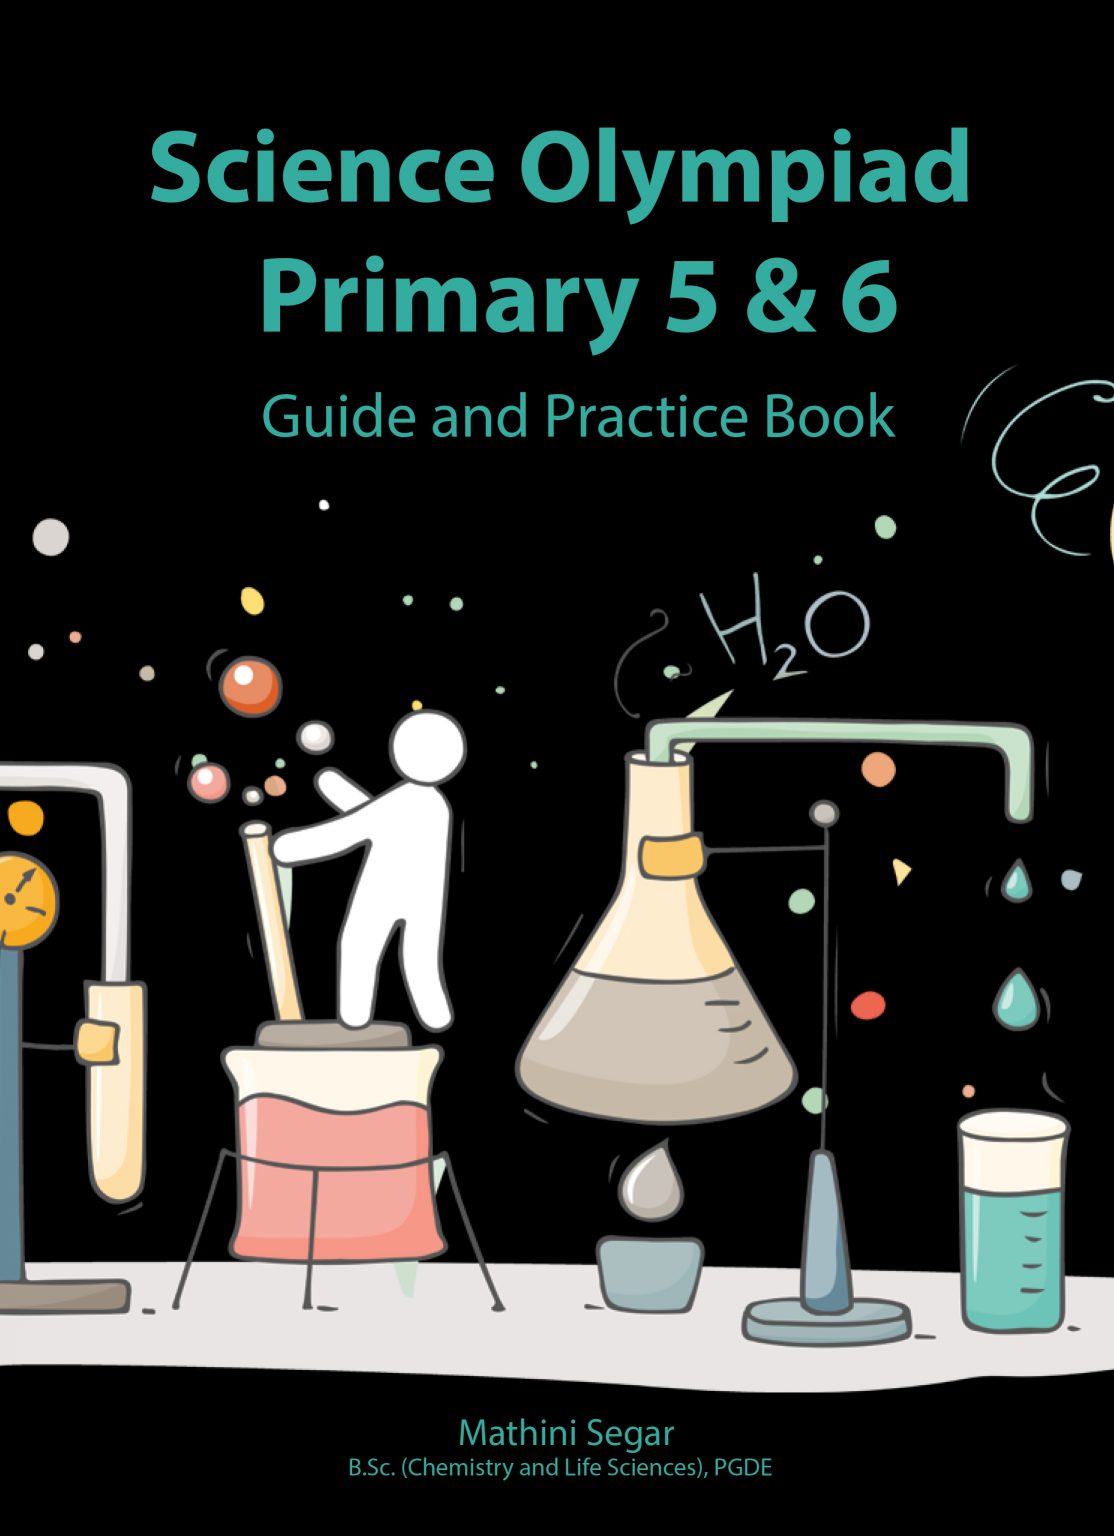 Science Olympiad Primary 5 & 6 Guide and Practice Book CPD Singapore